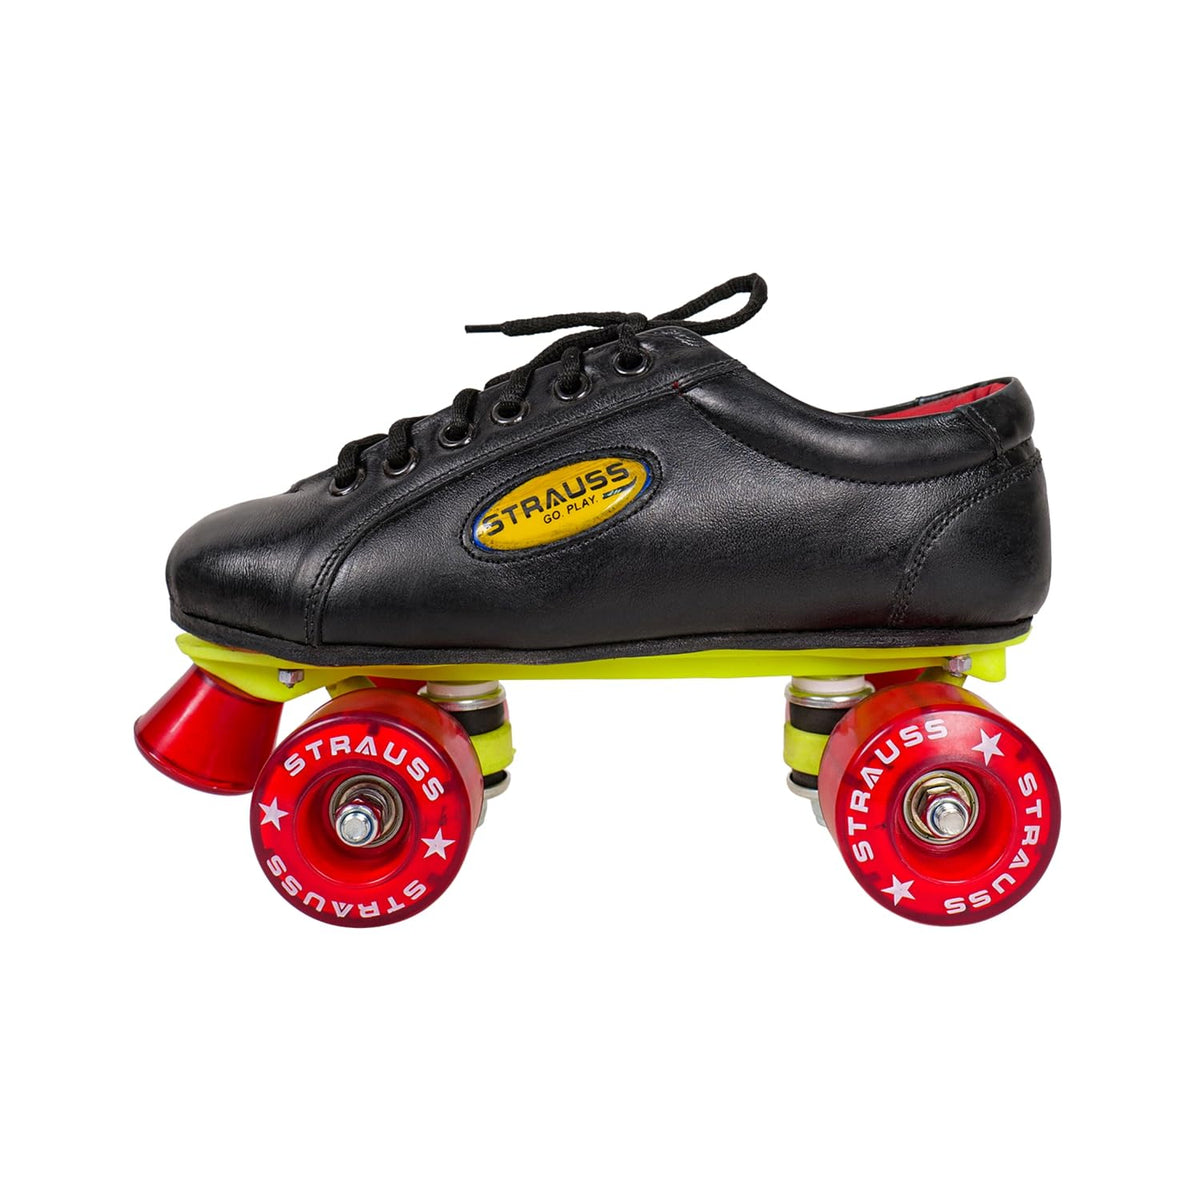 STRAUSS Gripper Skating Shoes | Fixed Body Roller Skates | Shoe Skate with PVC Wheel |Ideal for Boys, Girls and Kids |Suitable for All Skill Level | Ideal for Junior (14-15 Years) Size-7, (Red/Black)